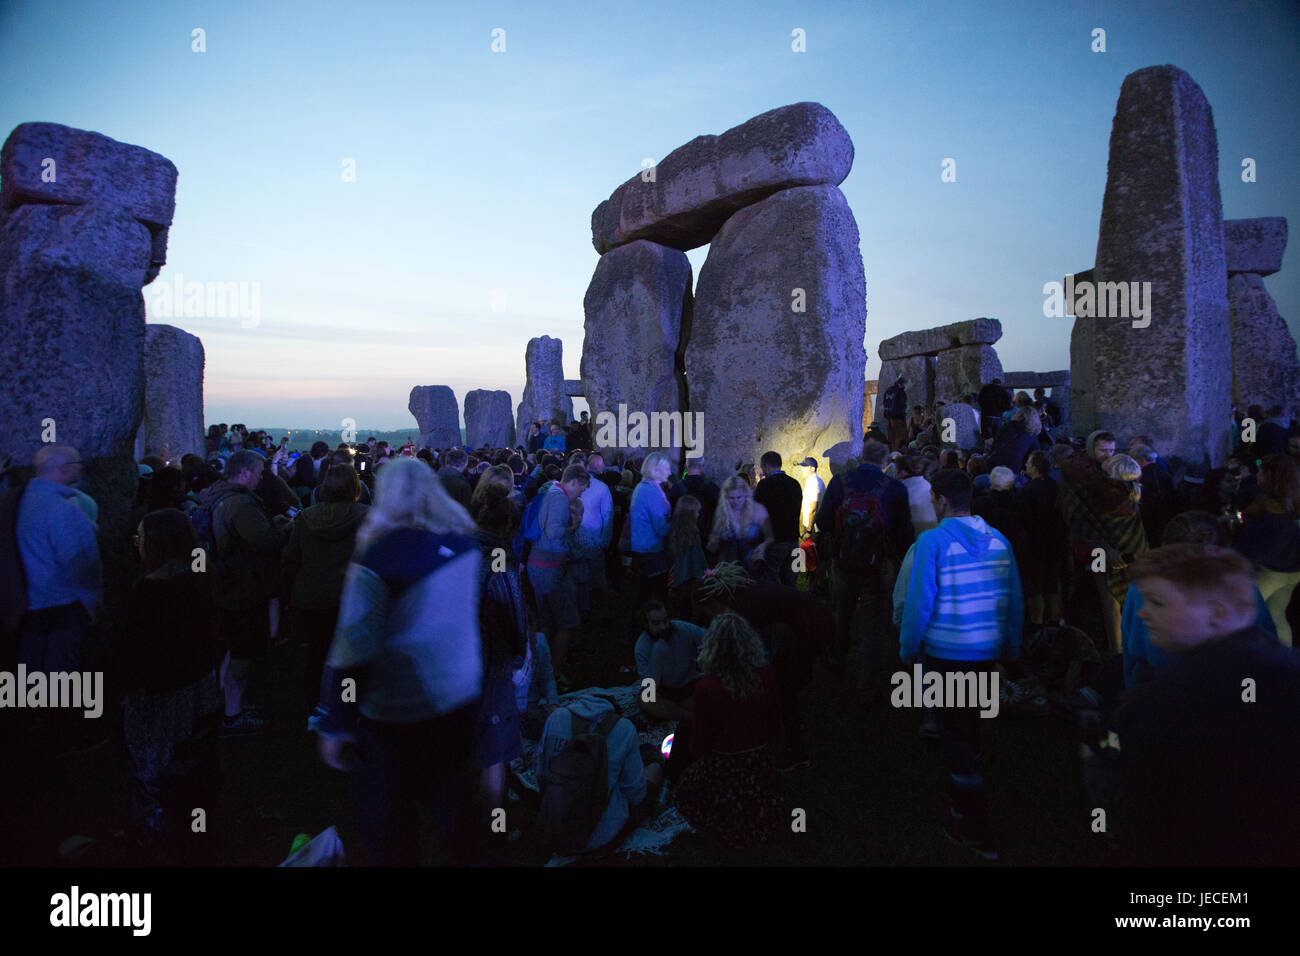 Stonehenge, ancient prehistoric site, place of worship and celebration at the time of Summer Solstice, Wiltshire, England, United Kingdom Stock Photo